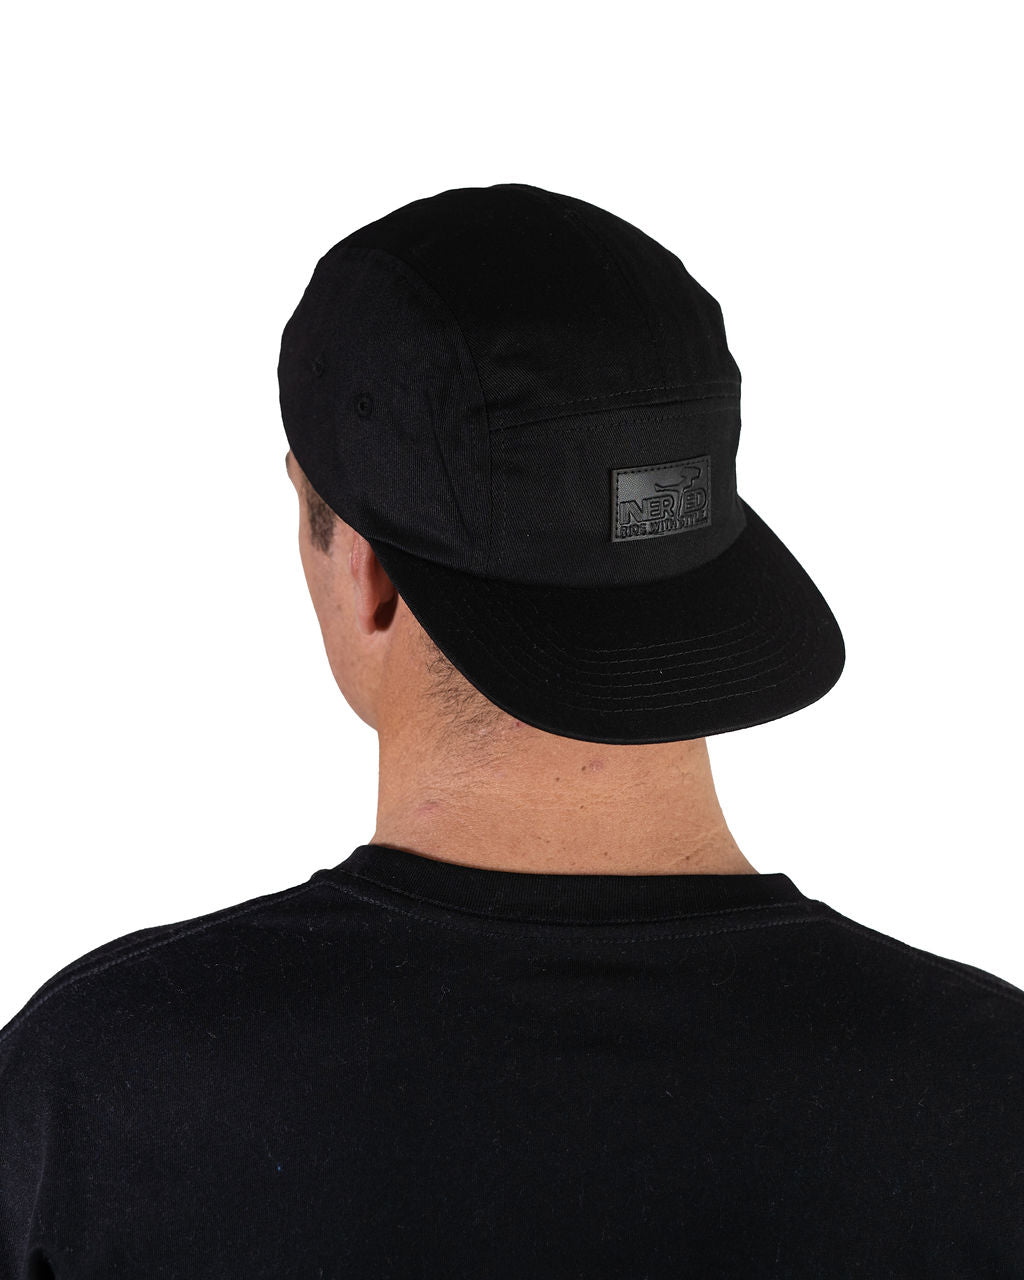 Inverted Ride With Style 5 Panel Hat